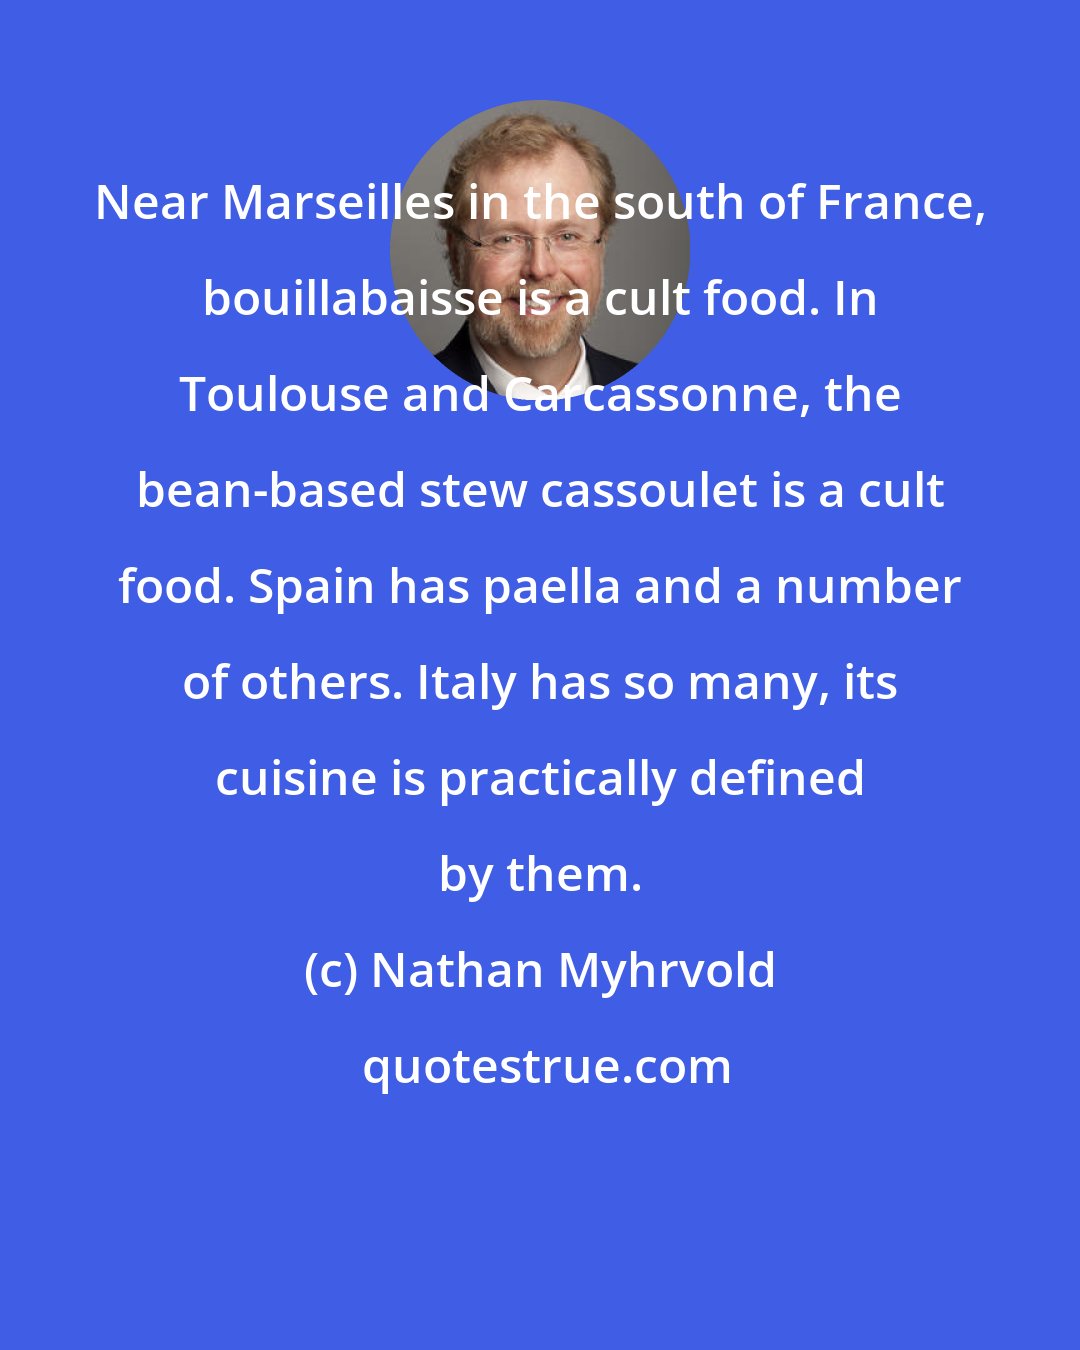 Nathan Myhrvold: Near Marseilles in the south of France, bouillabaisse is a cult food. In Toulouse and Carcassonne, the bean-based stew cassoulet is a cult food. Spain has paella and a number of others. Italy has so many, its cuisine is practically defined by them.